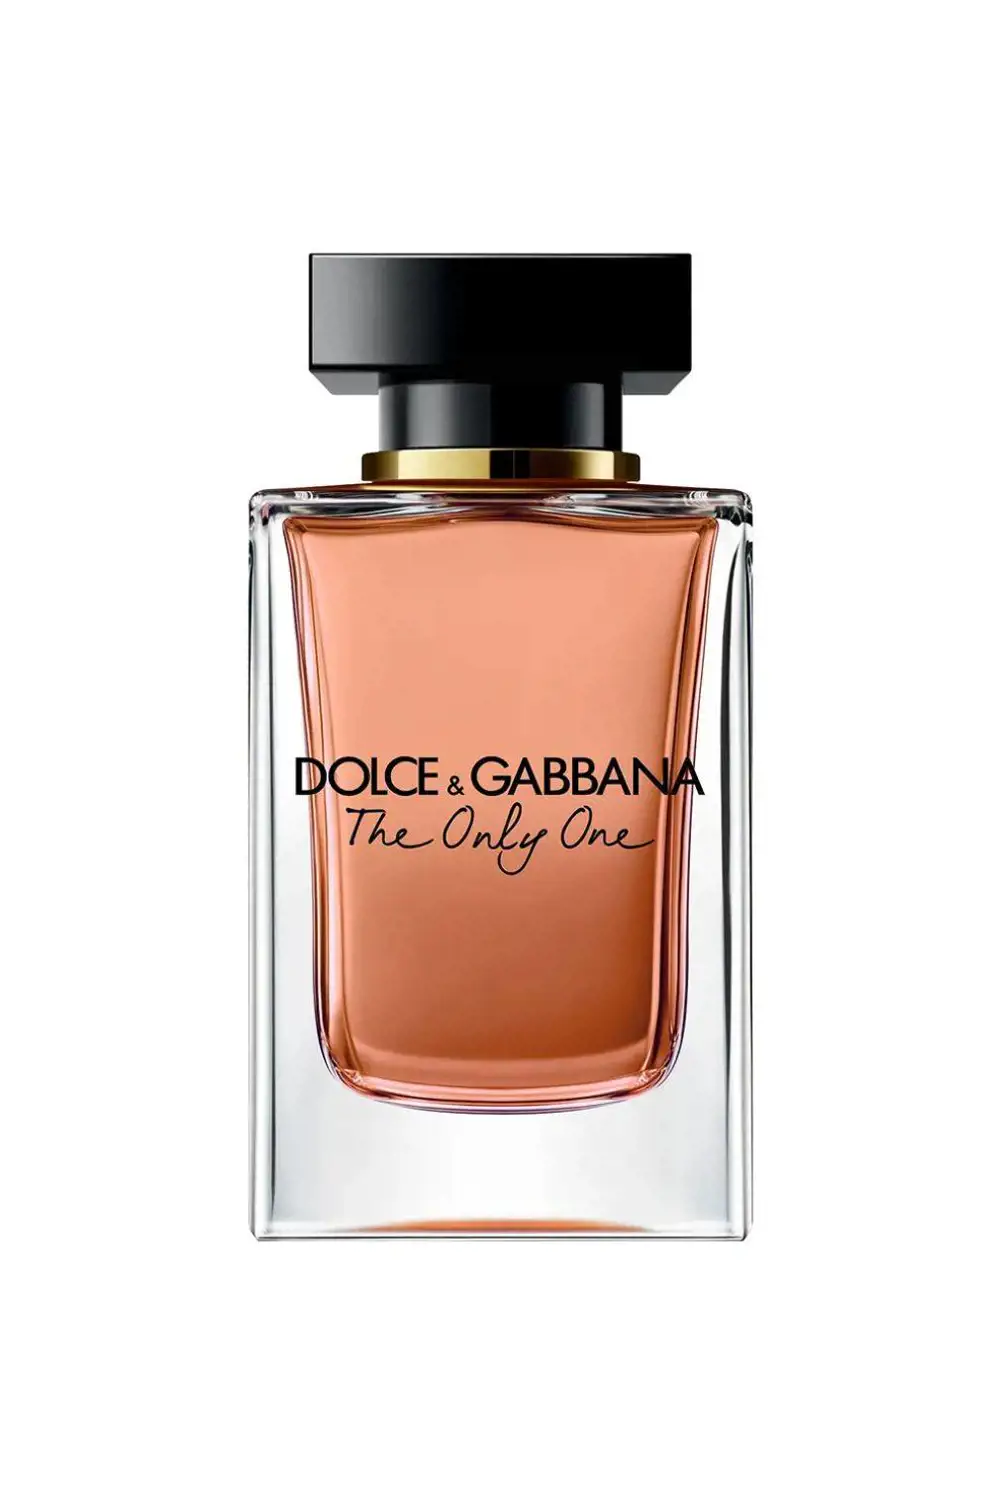 THE ONLY ONE DE DOLCE & GABBANA